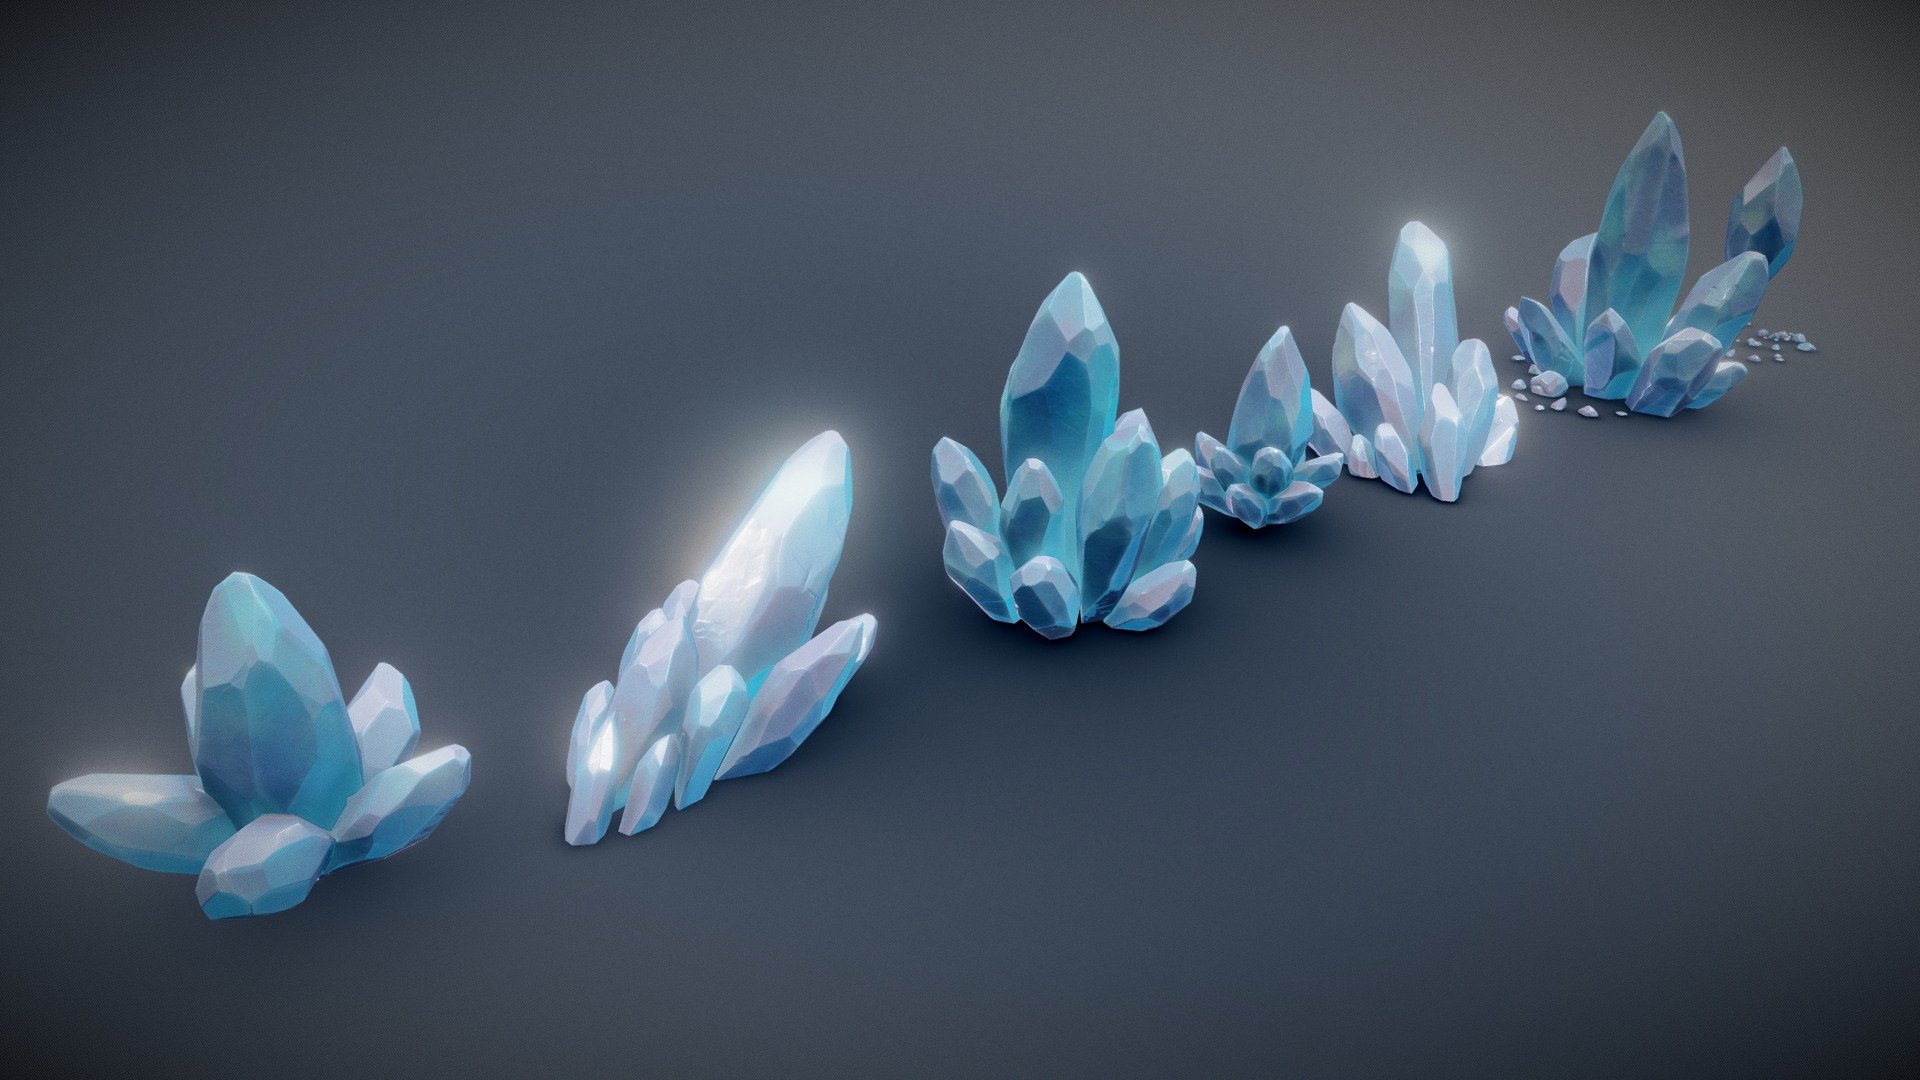 Beautiful stylized crystals pack! These game ready models have been carefully crafted for any type of game or media.

Models Included: 08


CrystalCluster_01 892 Triangles
CrystalCluster_02 1921 Triangles
CrystalCluster_03 2454 Triangles
CrystalCluster_04 1747 Triangles
CrystalCluster_05 2614 Triangles
CrystalCluster_06 2838 Triangles
CrystalCluster_07 184 Triangles
CrystalCluster_08 2572 Triangles

Textures Included: 9 (Texture variations included inside the included .zip file)


Rigging: No
Animation count: Non
UV Mapping: Yes
Types of materials: PBR/Custom
Types of textures: Albedo, Normal, Metallic, Ambient Occlusion, Emission.
 - Stylized Crystals Pack - Buy Royalty Free 3D model by otzee 3d model